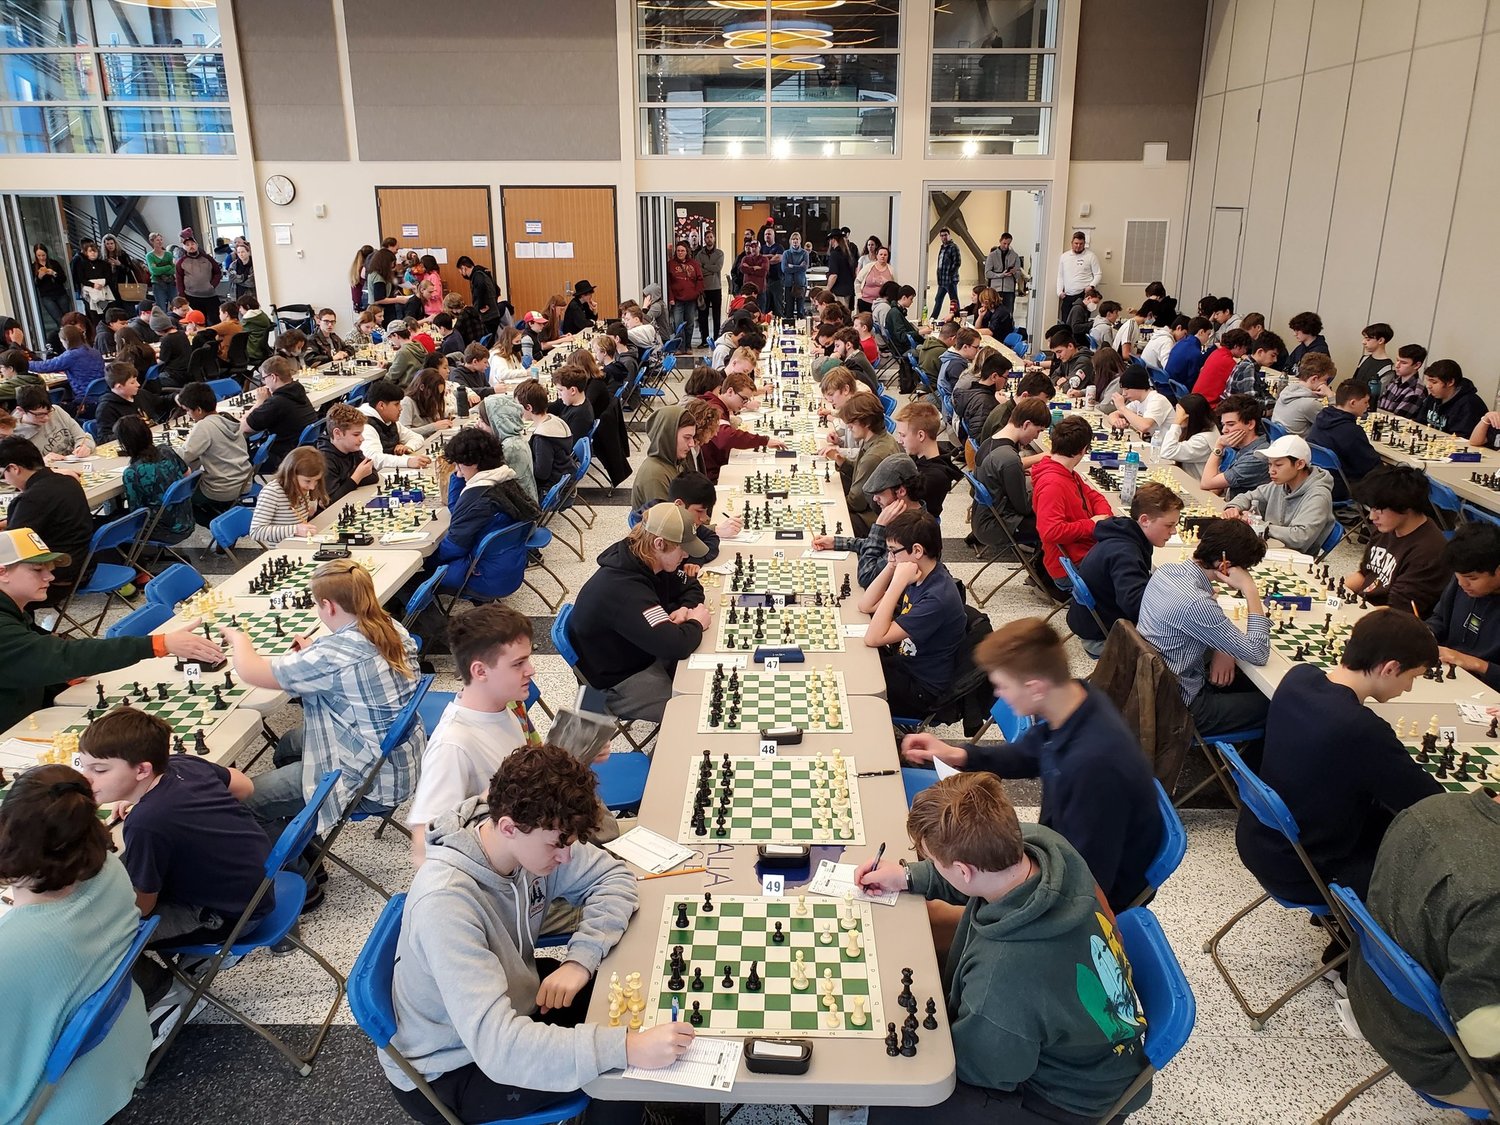 The 2023 Southwest Washington Scholastic Chess Championships were held at Centralia College on Saturday, with organizers calling the event the largest chess tournament in Lewis County history. 